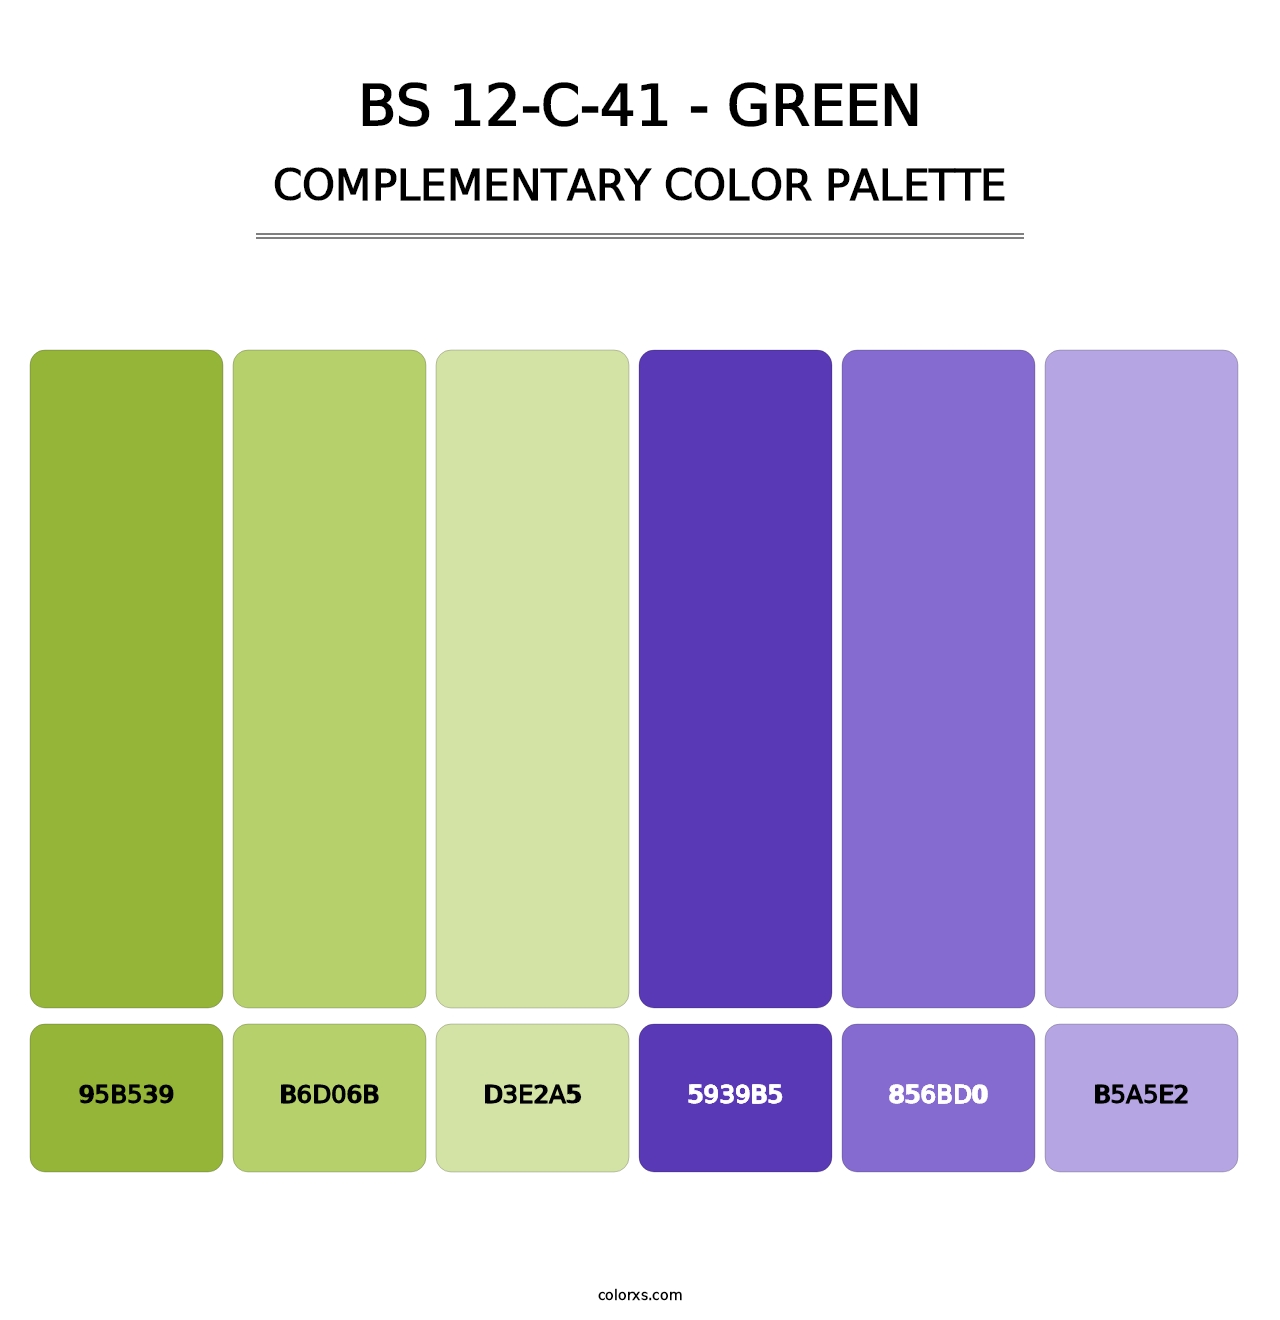 BS 12-C-41 - Green - Complementary Color Palette